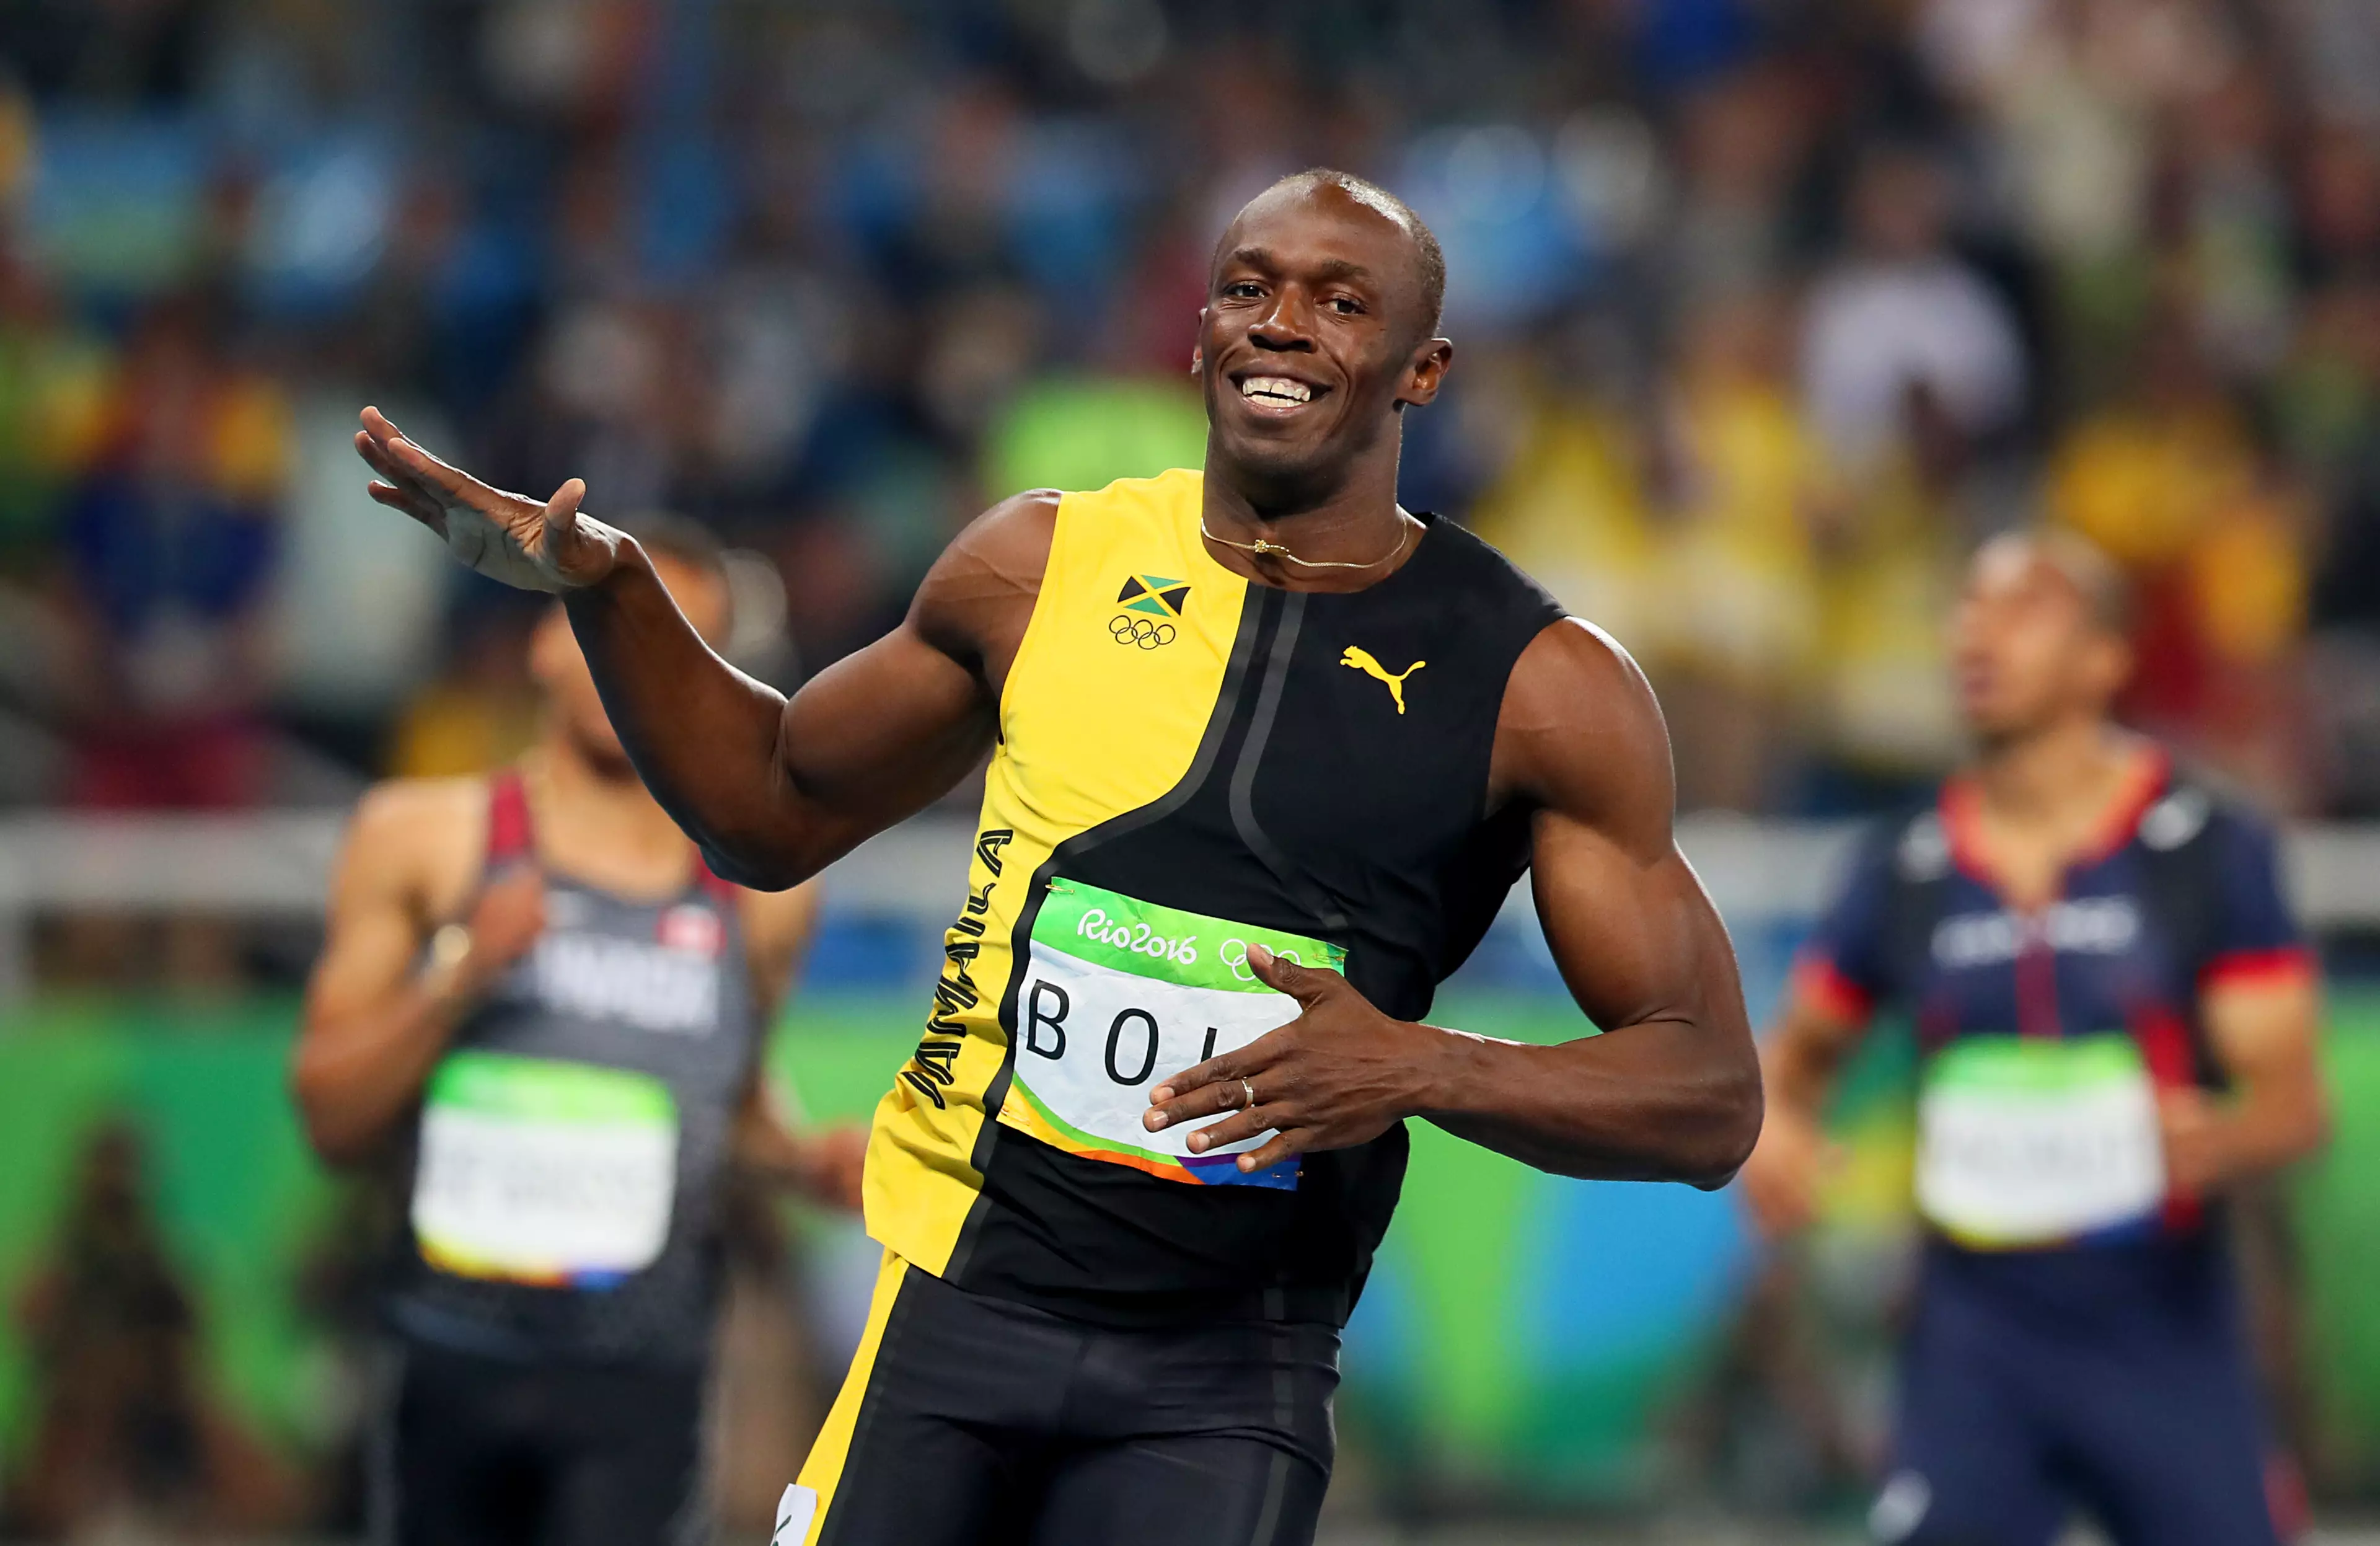 BREAKING: Usain Bolt Has To Hand One Of His Nine Gold Medals Back